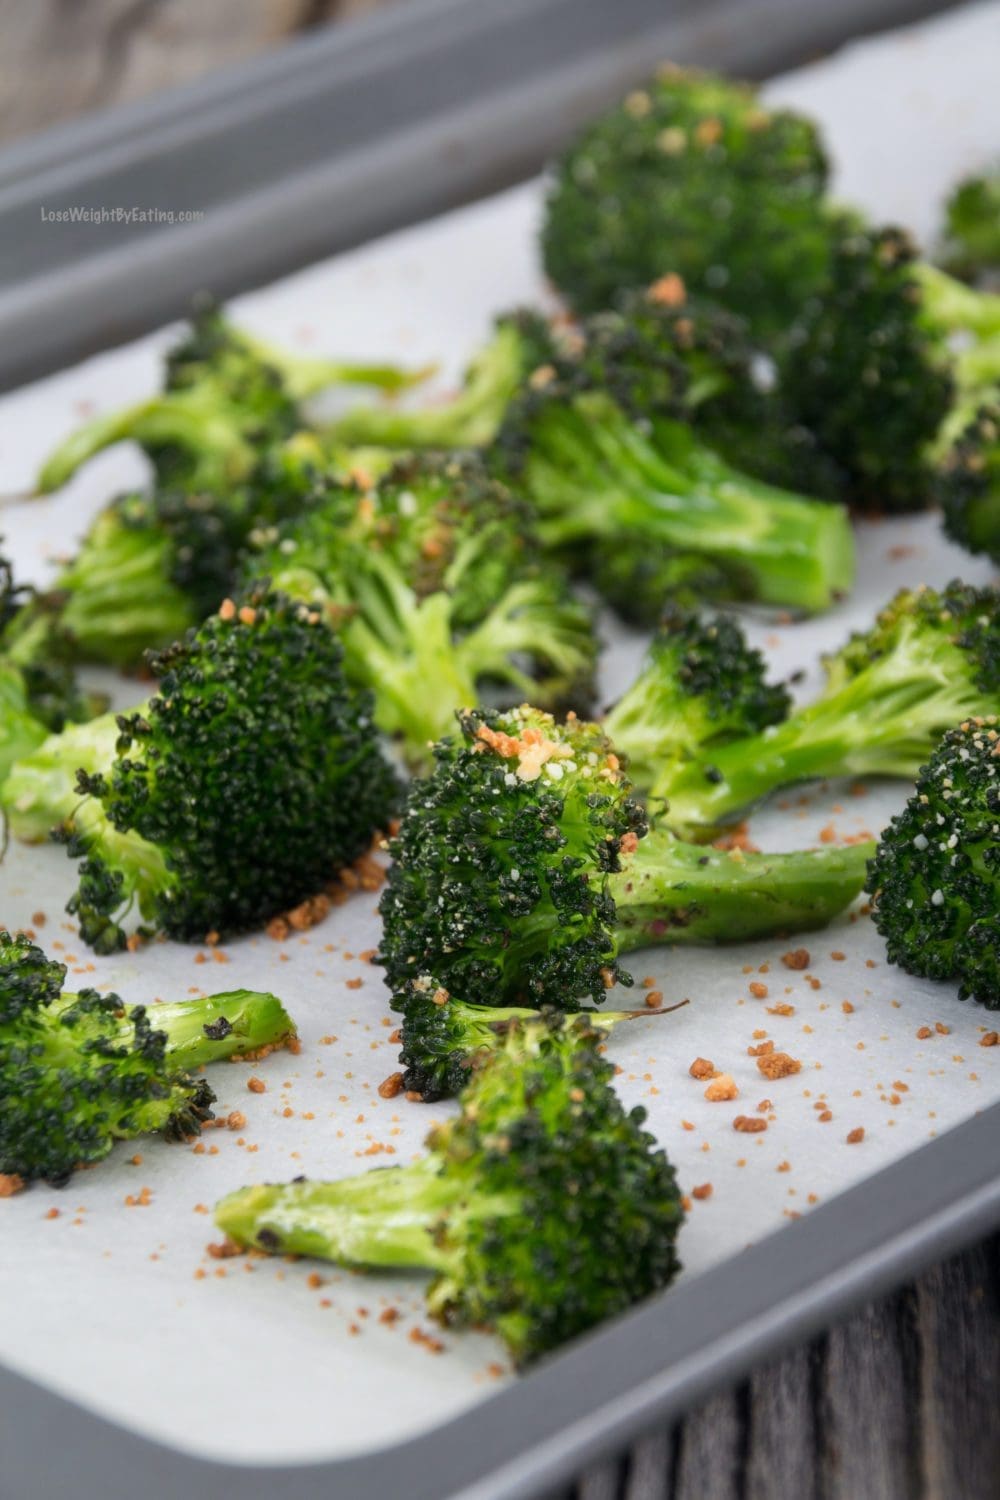 Oven Roasted Broccoli Recipe The 20 Best Healthy Holiday Recipes